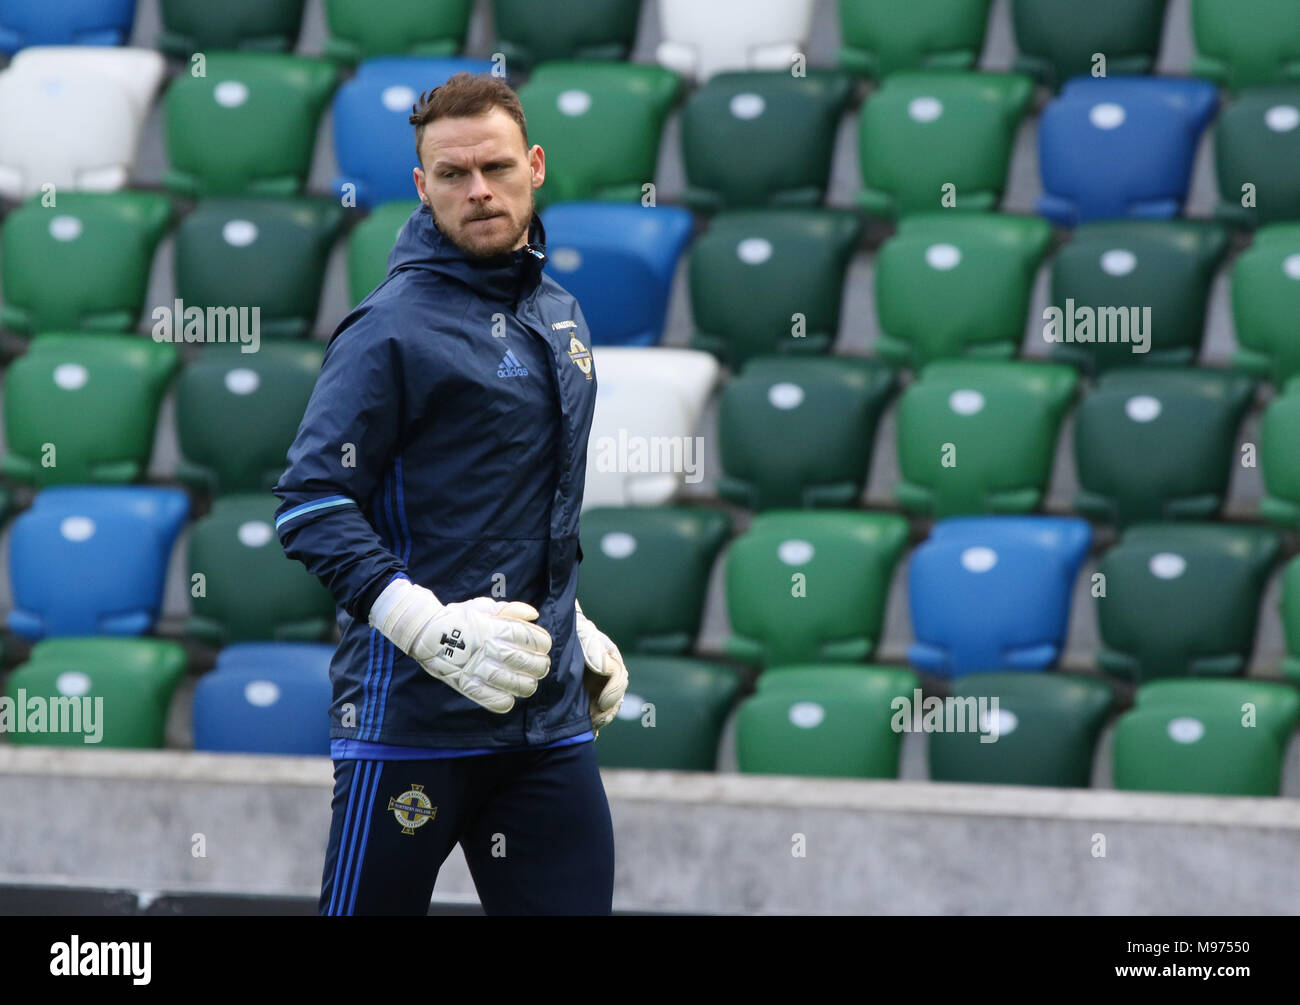 National Football Stadium at Windsor Park, Belfast, Northern Ireland. 23 March 2018. Northern Ireland training ahead of tomorrow afternoon's international friendly against the Republic of Korea (South Korea) in Belfast. Goalkeeper Trevor Carson warms up. Credit: David Hunter/Alamy Live News. Stock Photo